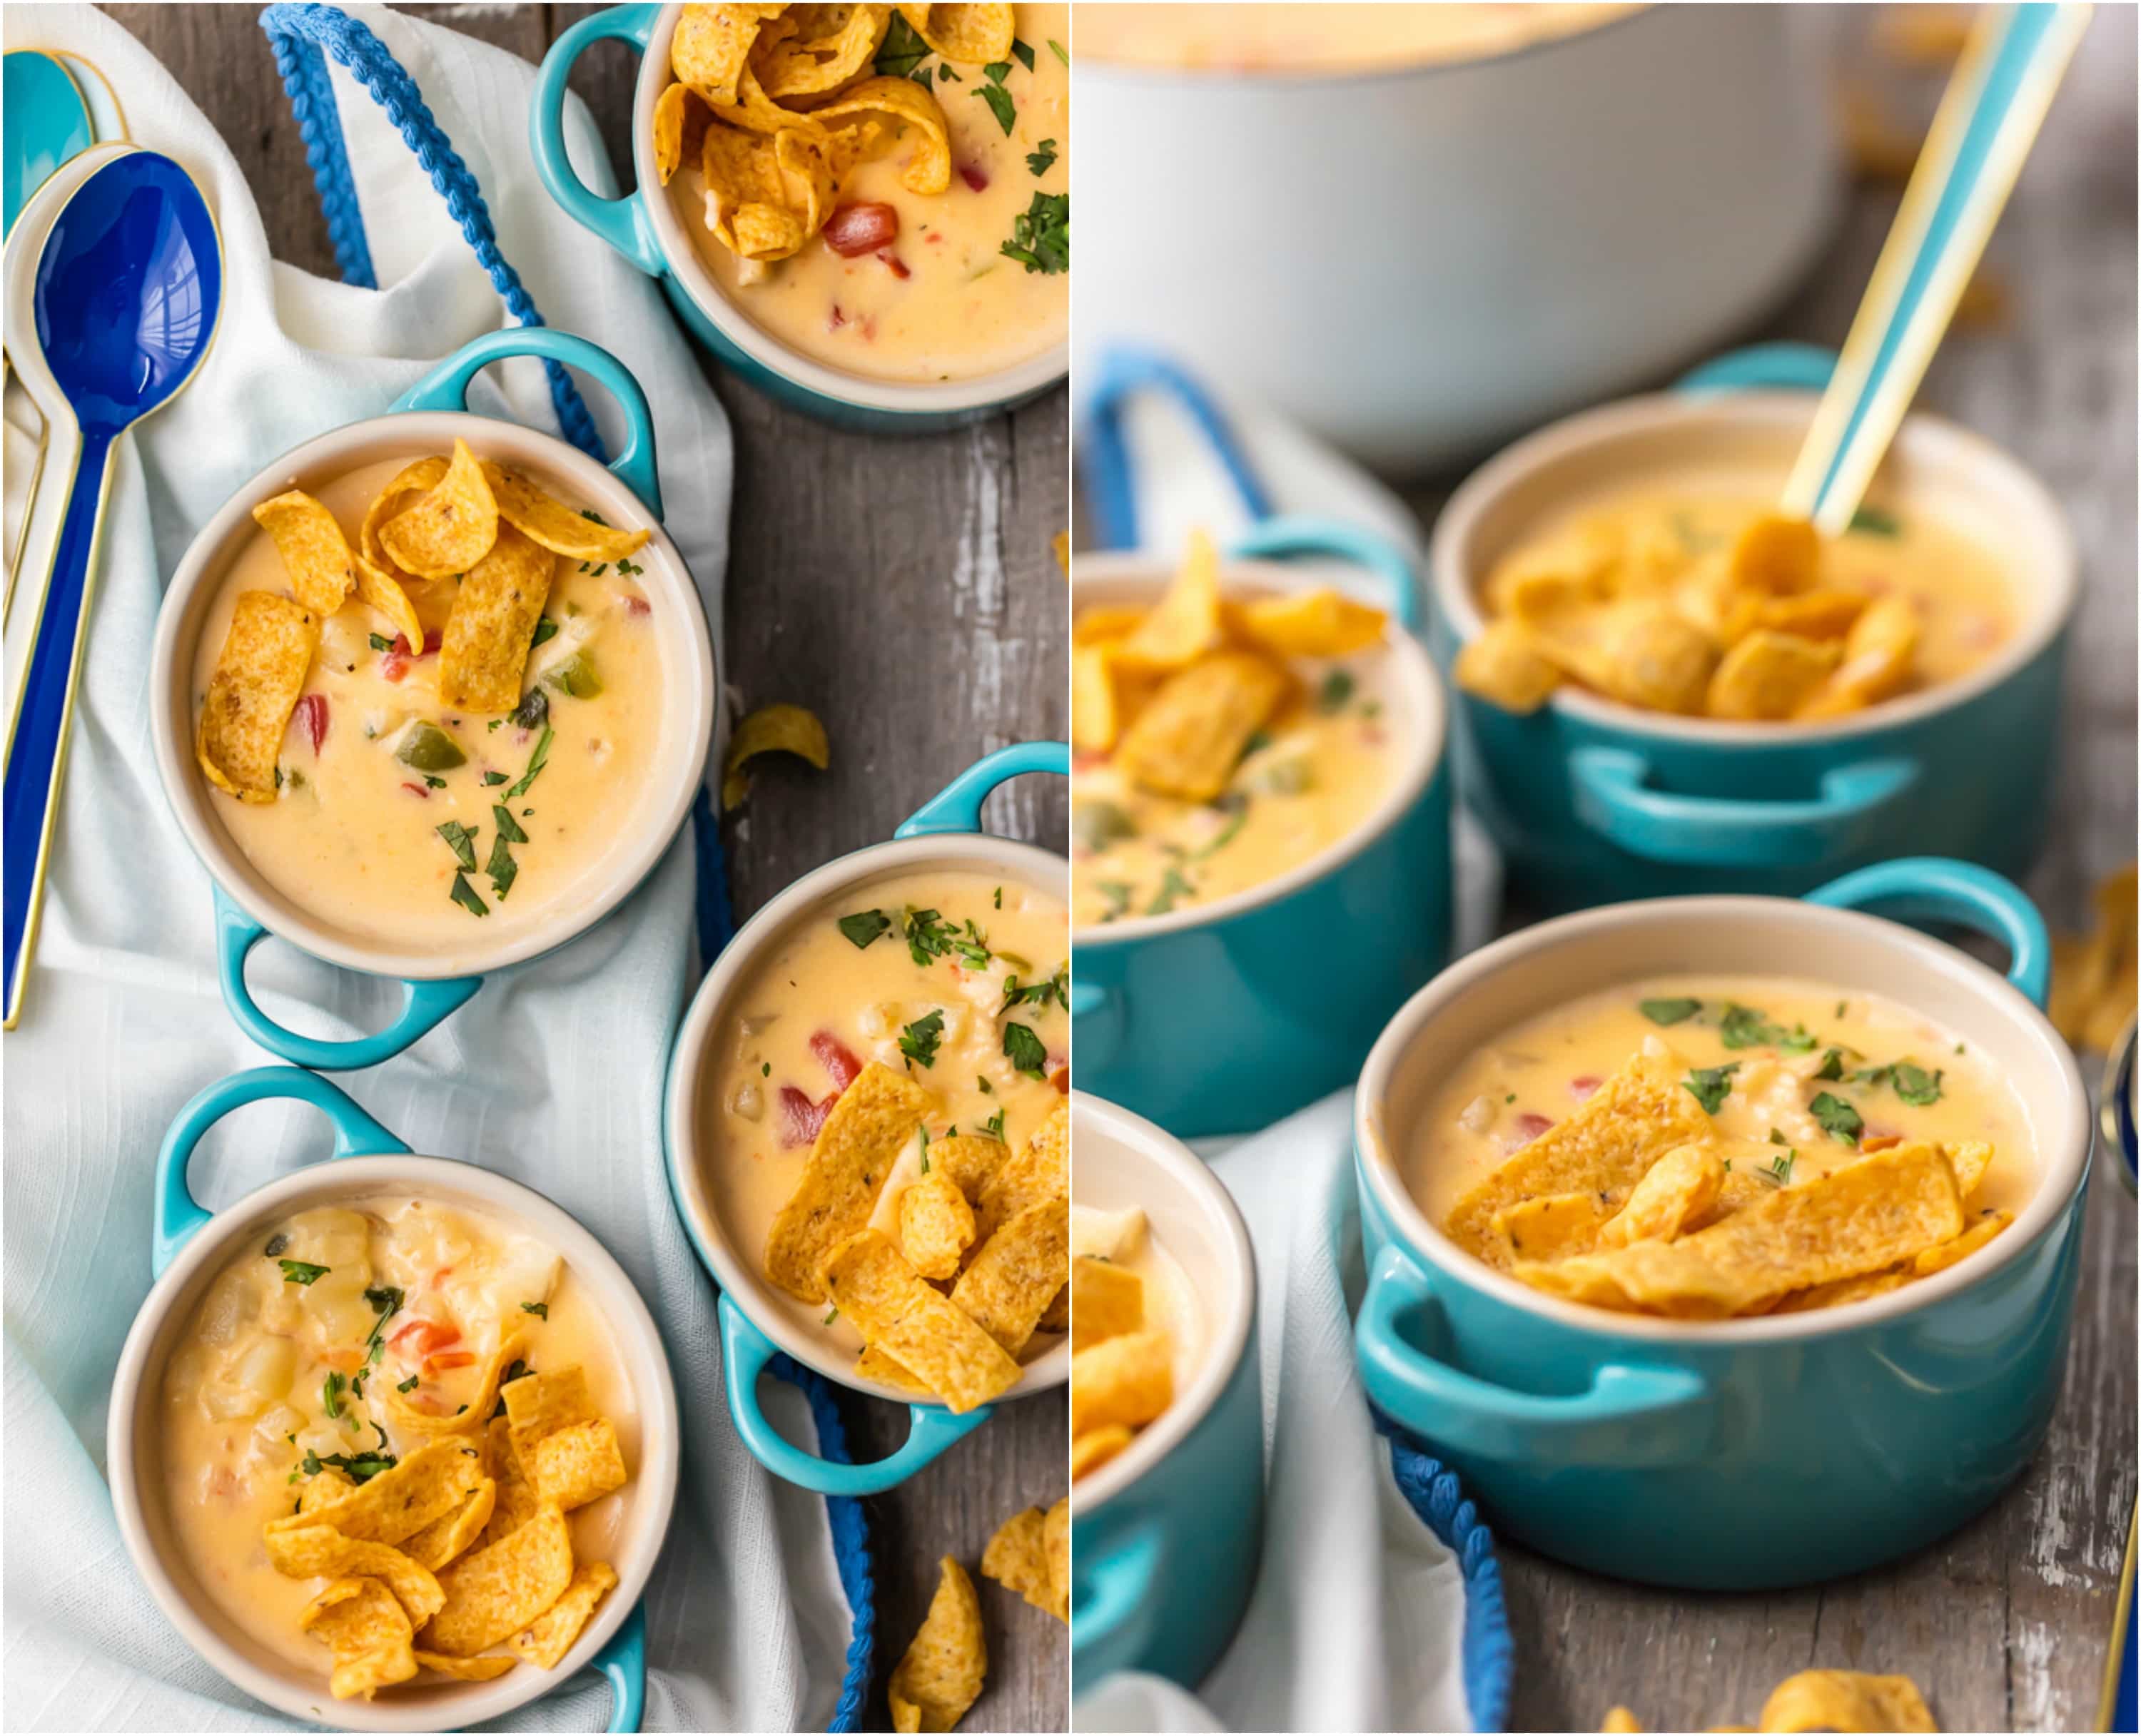 This MEXICAN CHEESY CHICKEN CHOWDER is the ultimate Winter comfort food soup! Loaded with spicy tomatoes, green peppers, hash brown potatoes, garlic, onion, CHEESE, and more, this was an instant favorite at our house. Serve with fritos or tortilla chips and you're in business. SO GOOD.